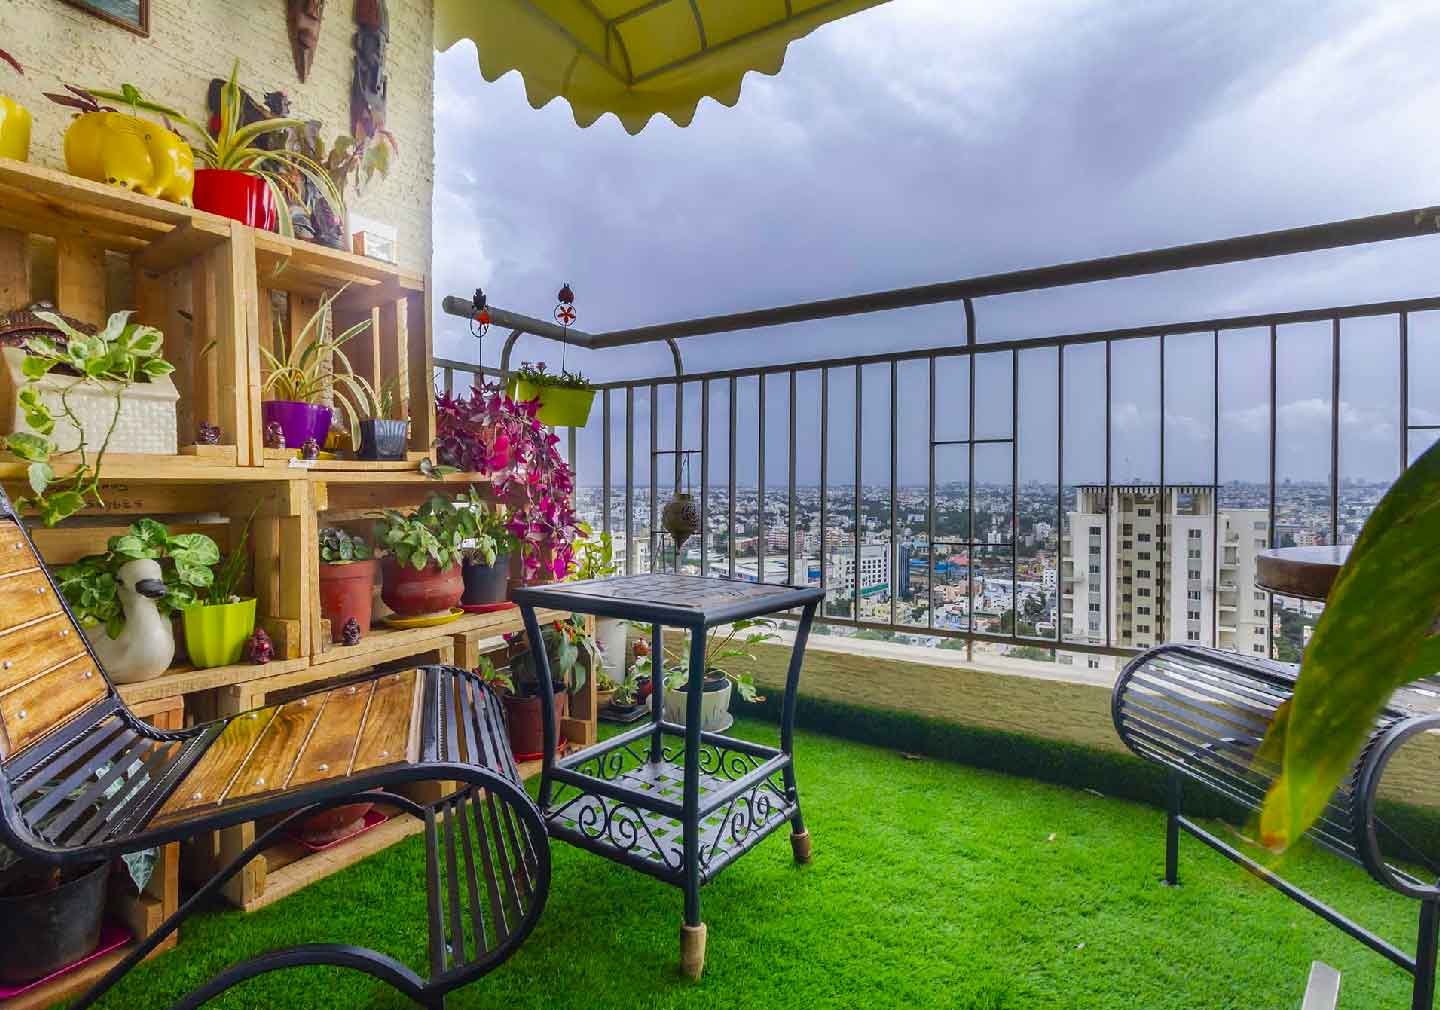 Seating Amidst Florals - Balcony Decoration Ideas